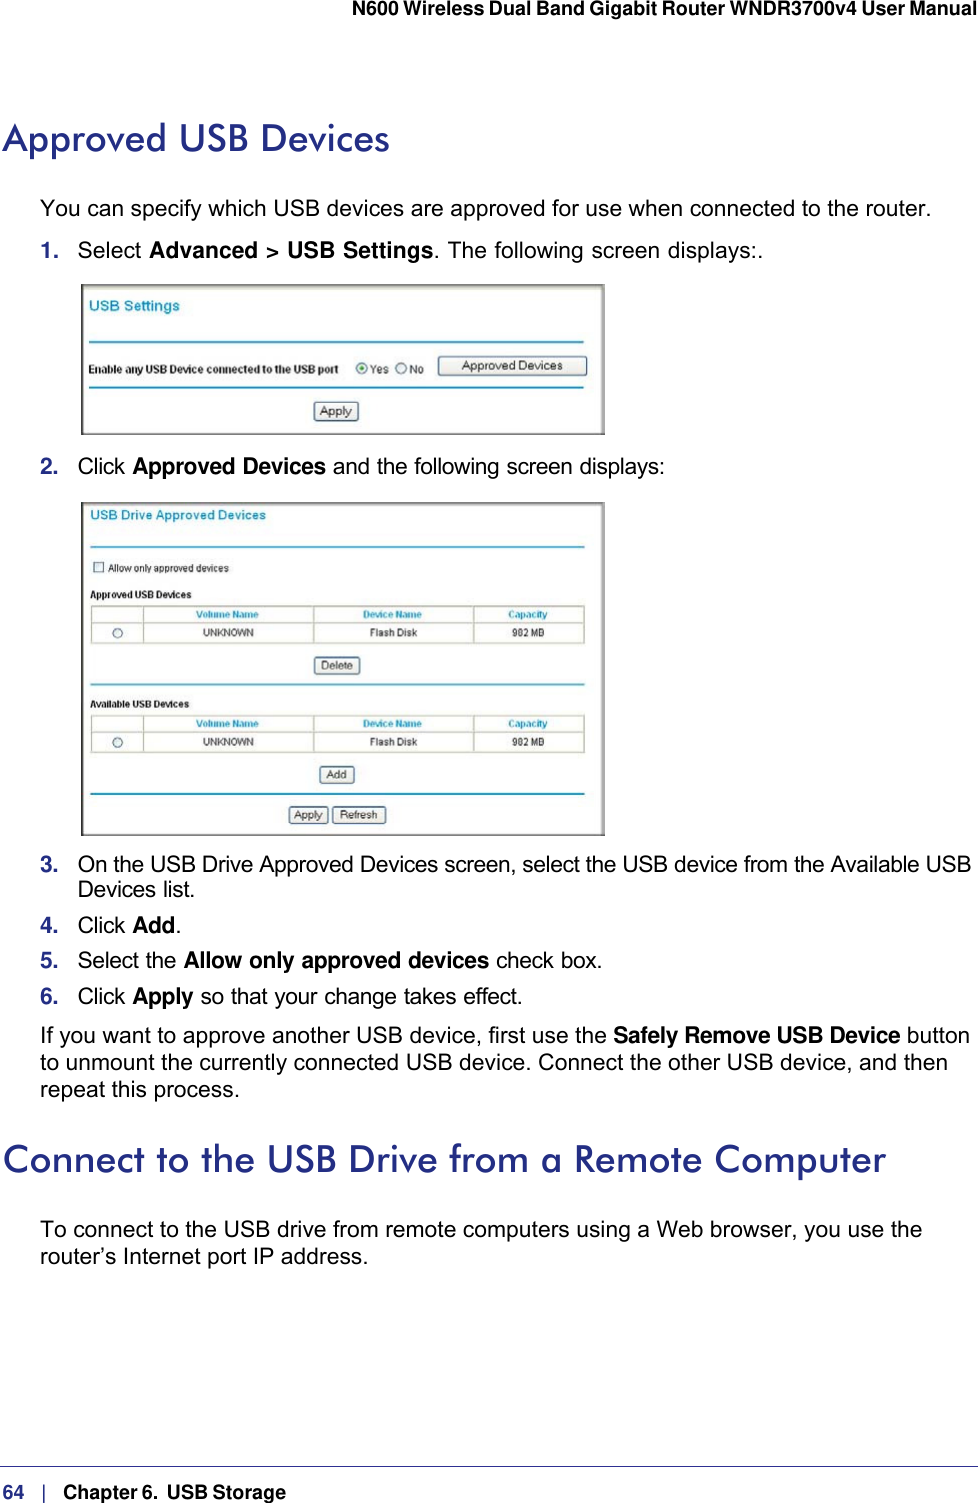 64   |   Chapter 6.  USB Storage  N600 Wireless Dual Band Gigabit Router WNDR3700v4 User Manual Approved USB DevicesYou can specify which USB devices are approved for use when connected to the router.1.  Select Advanced &gt; USB Settings. The following screen displays:. 2.  Click Approved Devices and the following screen displays: 3.  On the USB Drive Approved Devices screen, select the USB device from the Available USB Devices list.4.  Click Add.5.  Select the Allow only approved devices check box.6.  Click Apply so that your change takes effect.If you want to approve another USB device, first use the Safely Remove USB Device button to unmount the currently connected USB device. Connect the other USB device, and then repeat this process.Connect to the USB Drive from a Remote ComputerTo connect to the USB drive from remote computers using a Web browser, you use the router’s Internet port IP address.